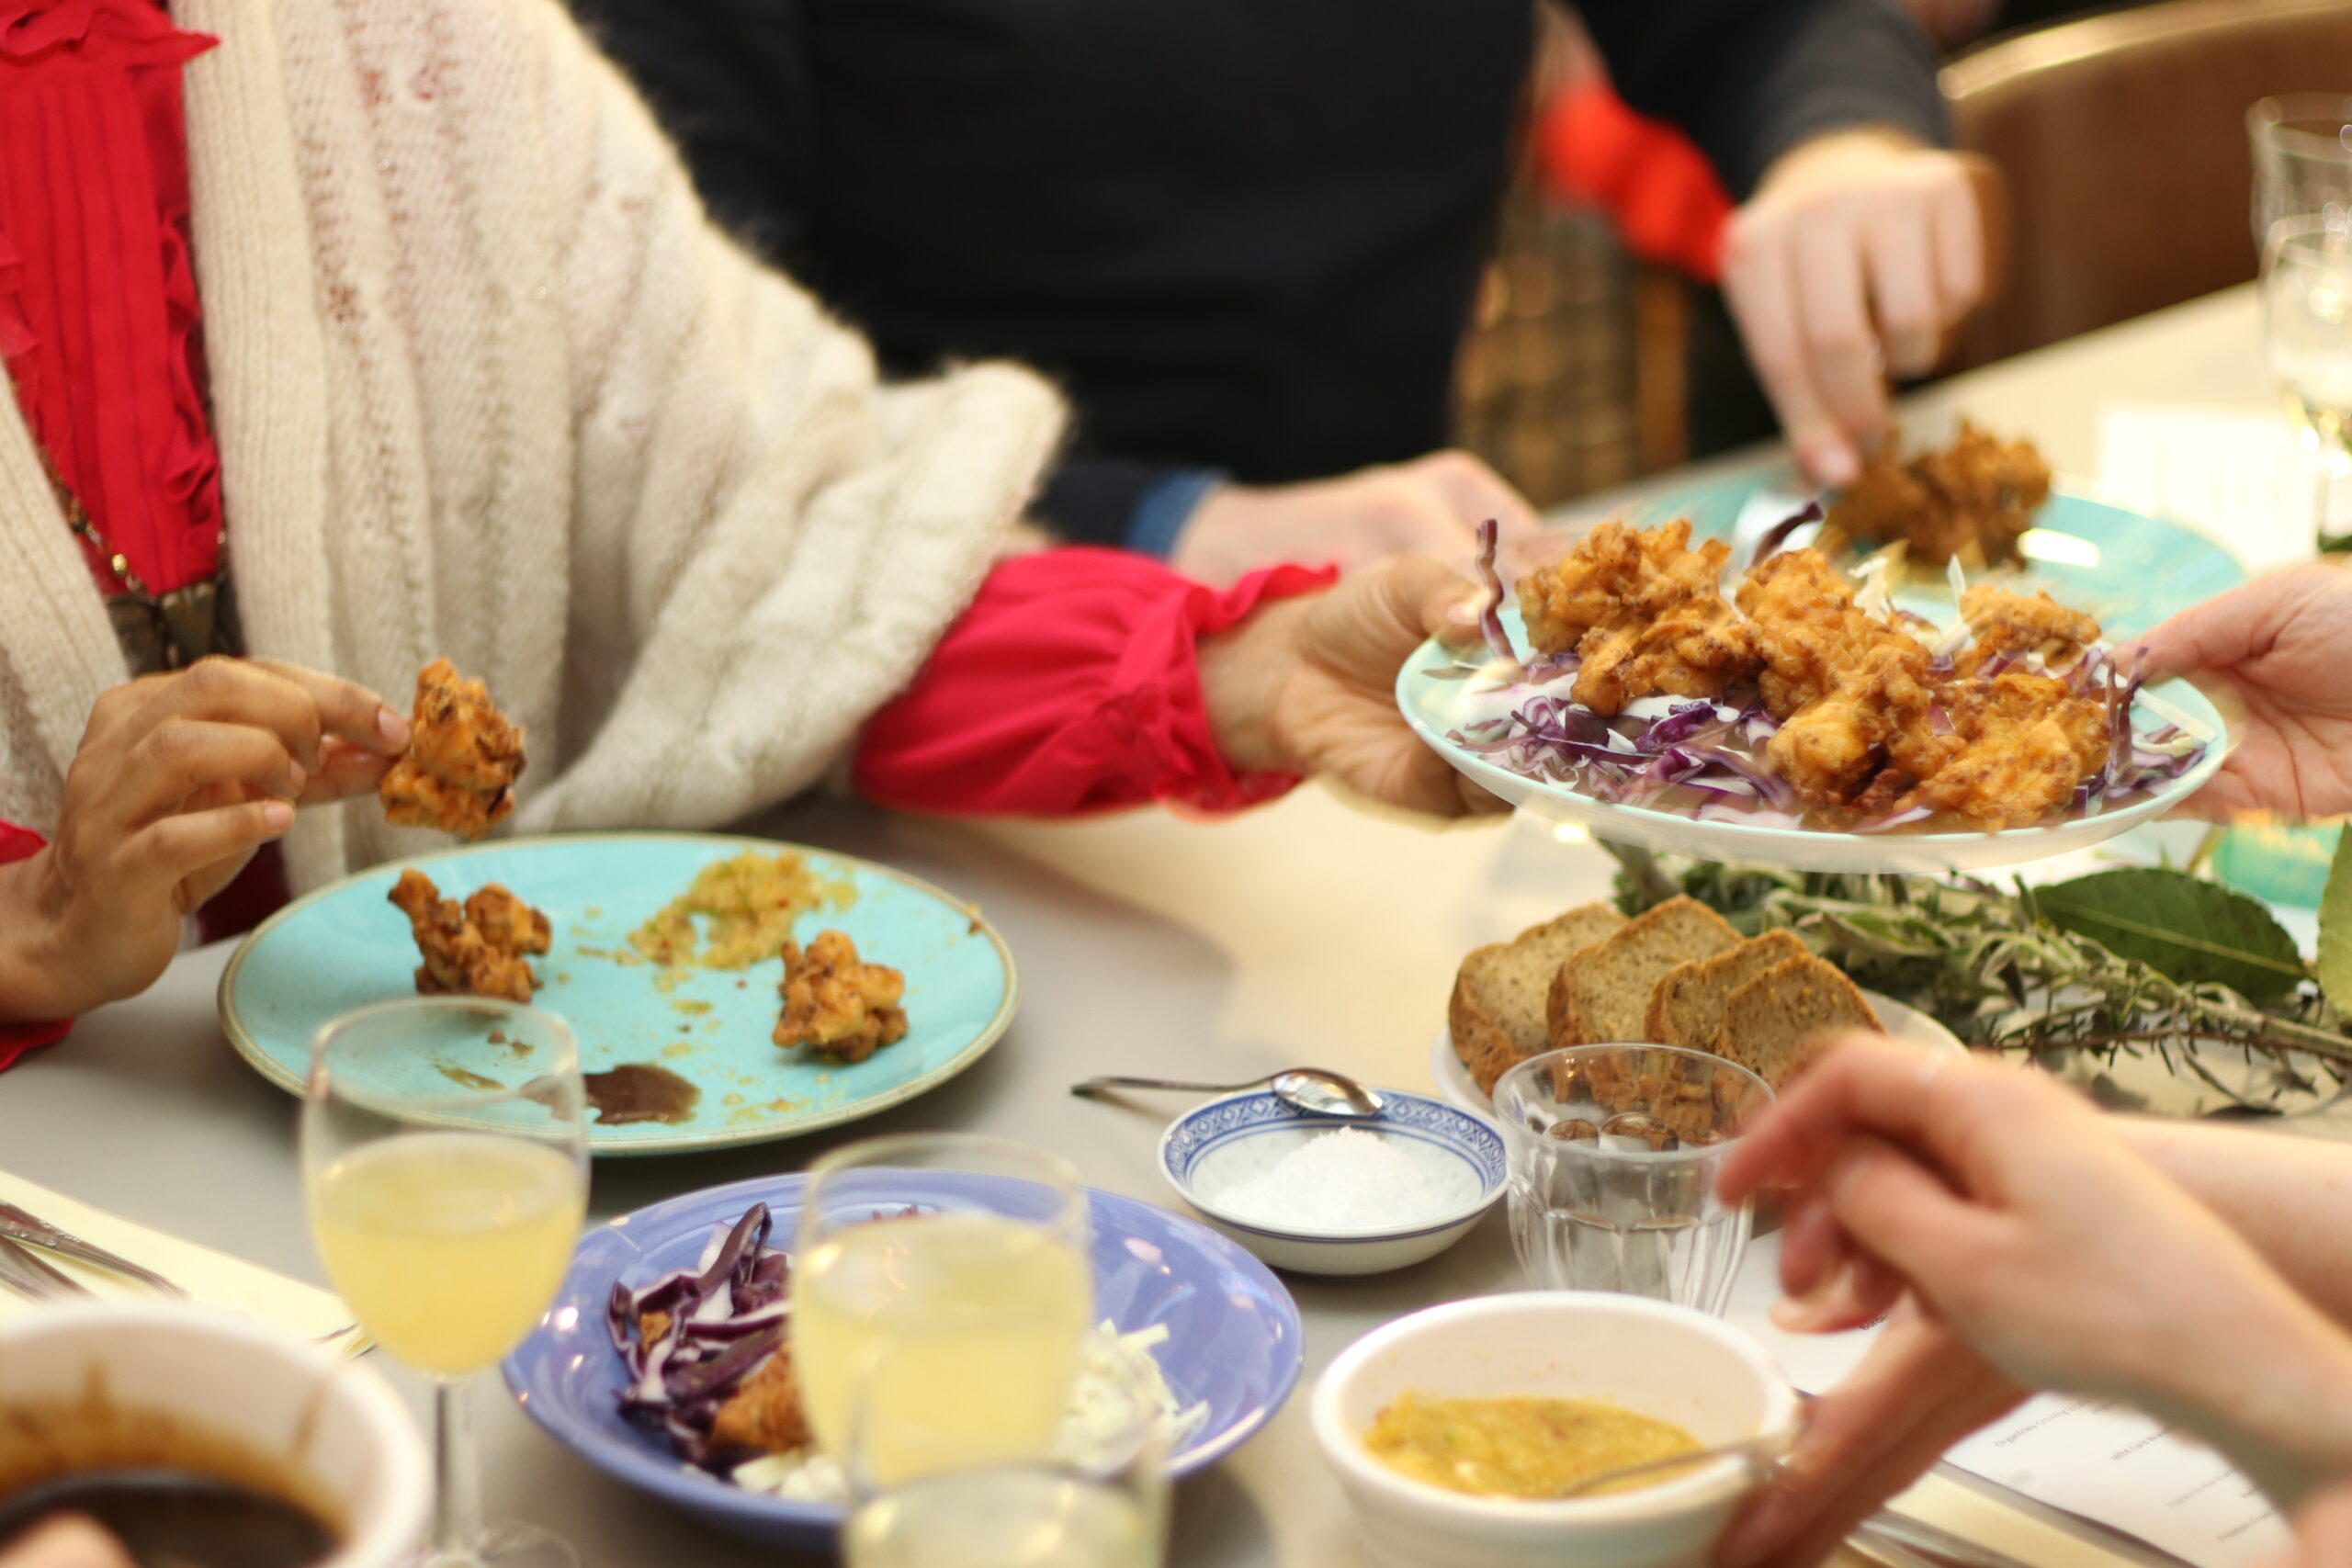 People sharing food at a table